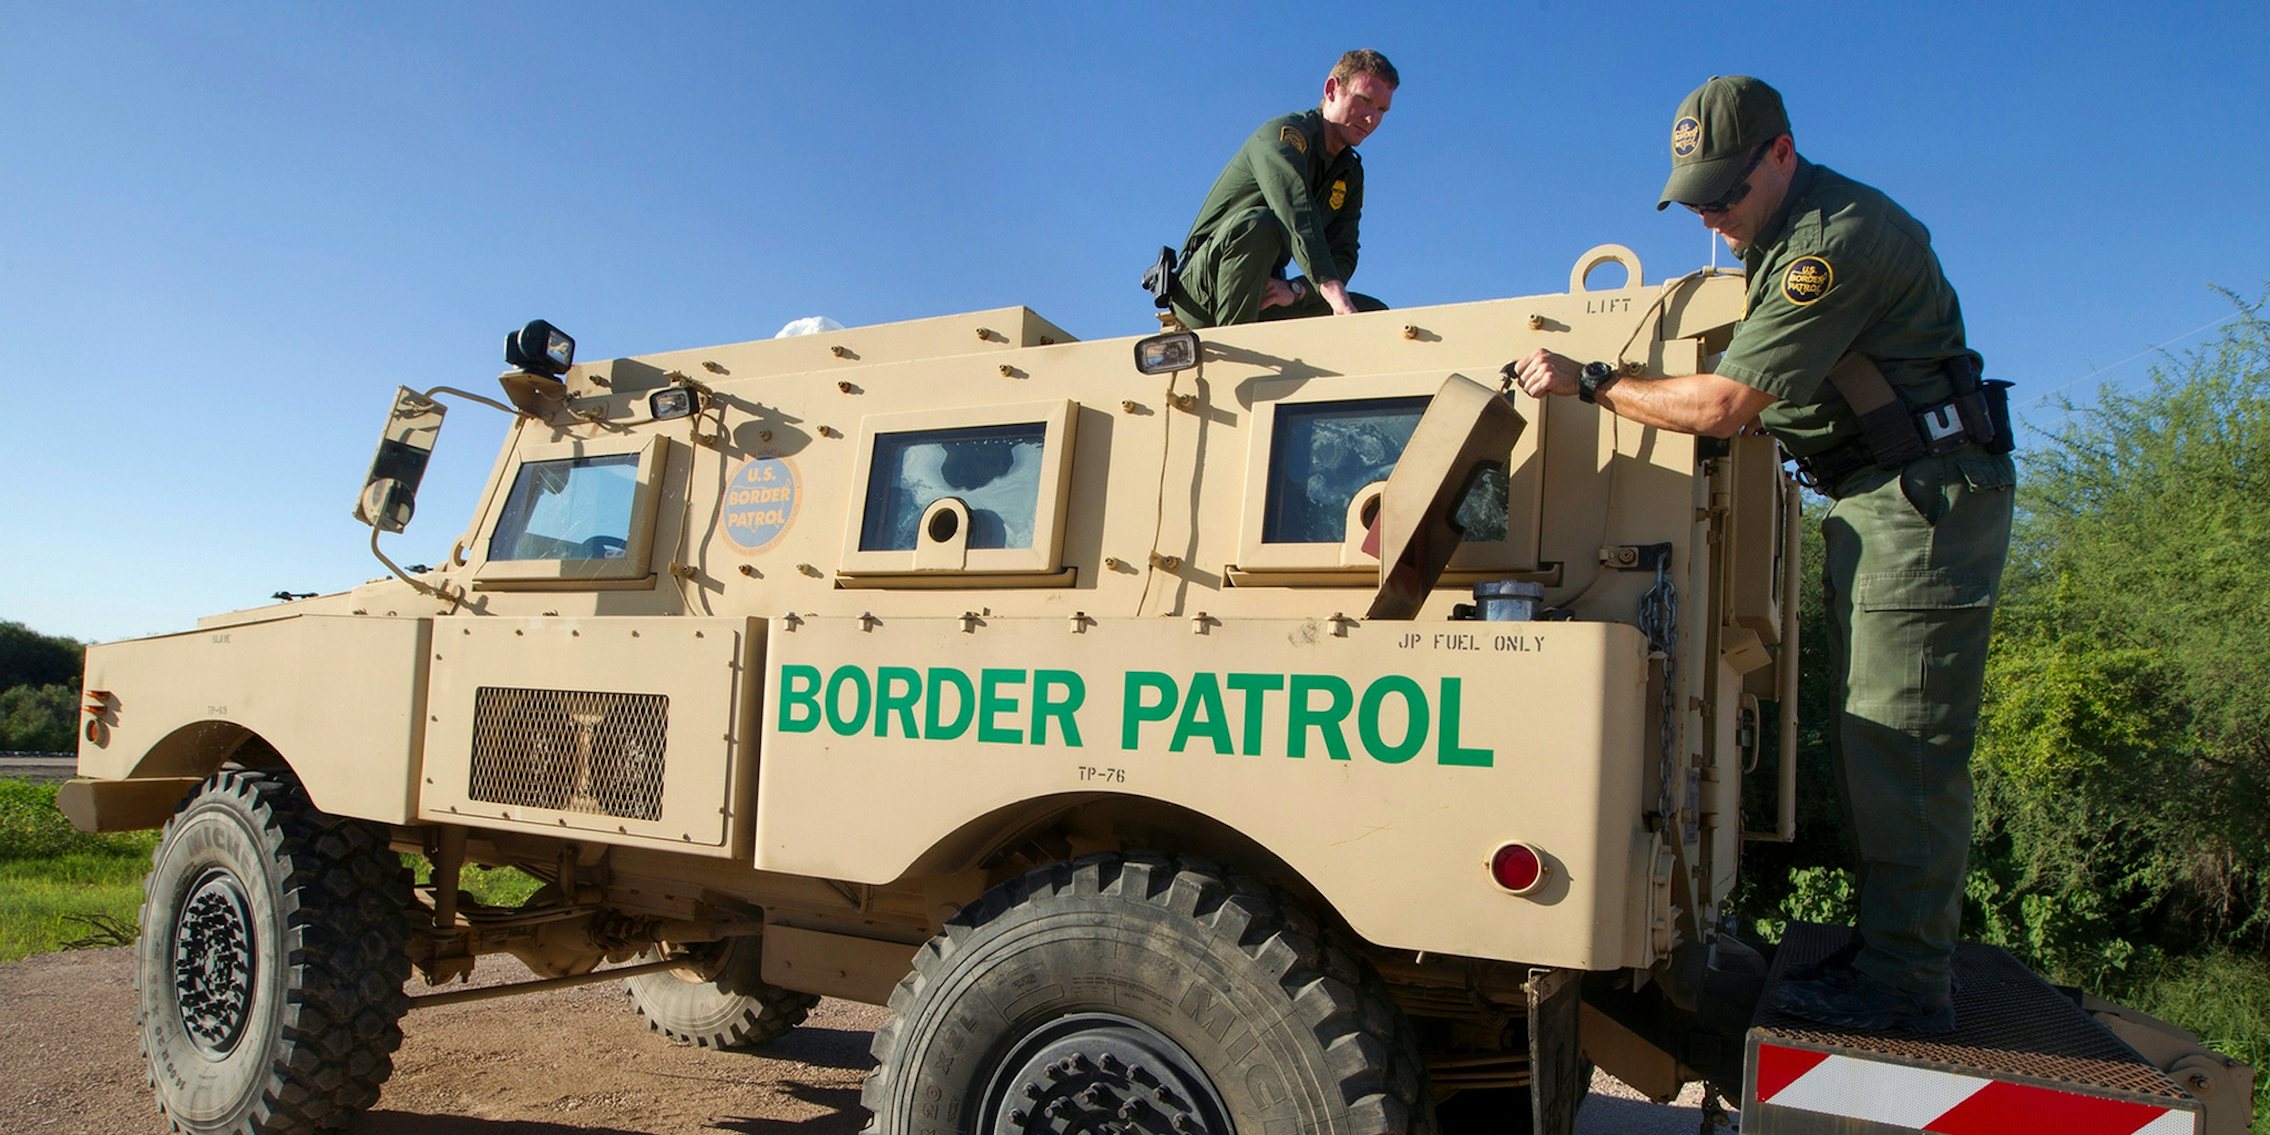 Border Patrol Agents conduct an operations check on a Mine Resistant Ambush Protected (MRAP) vehicle.